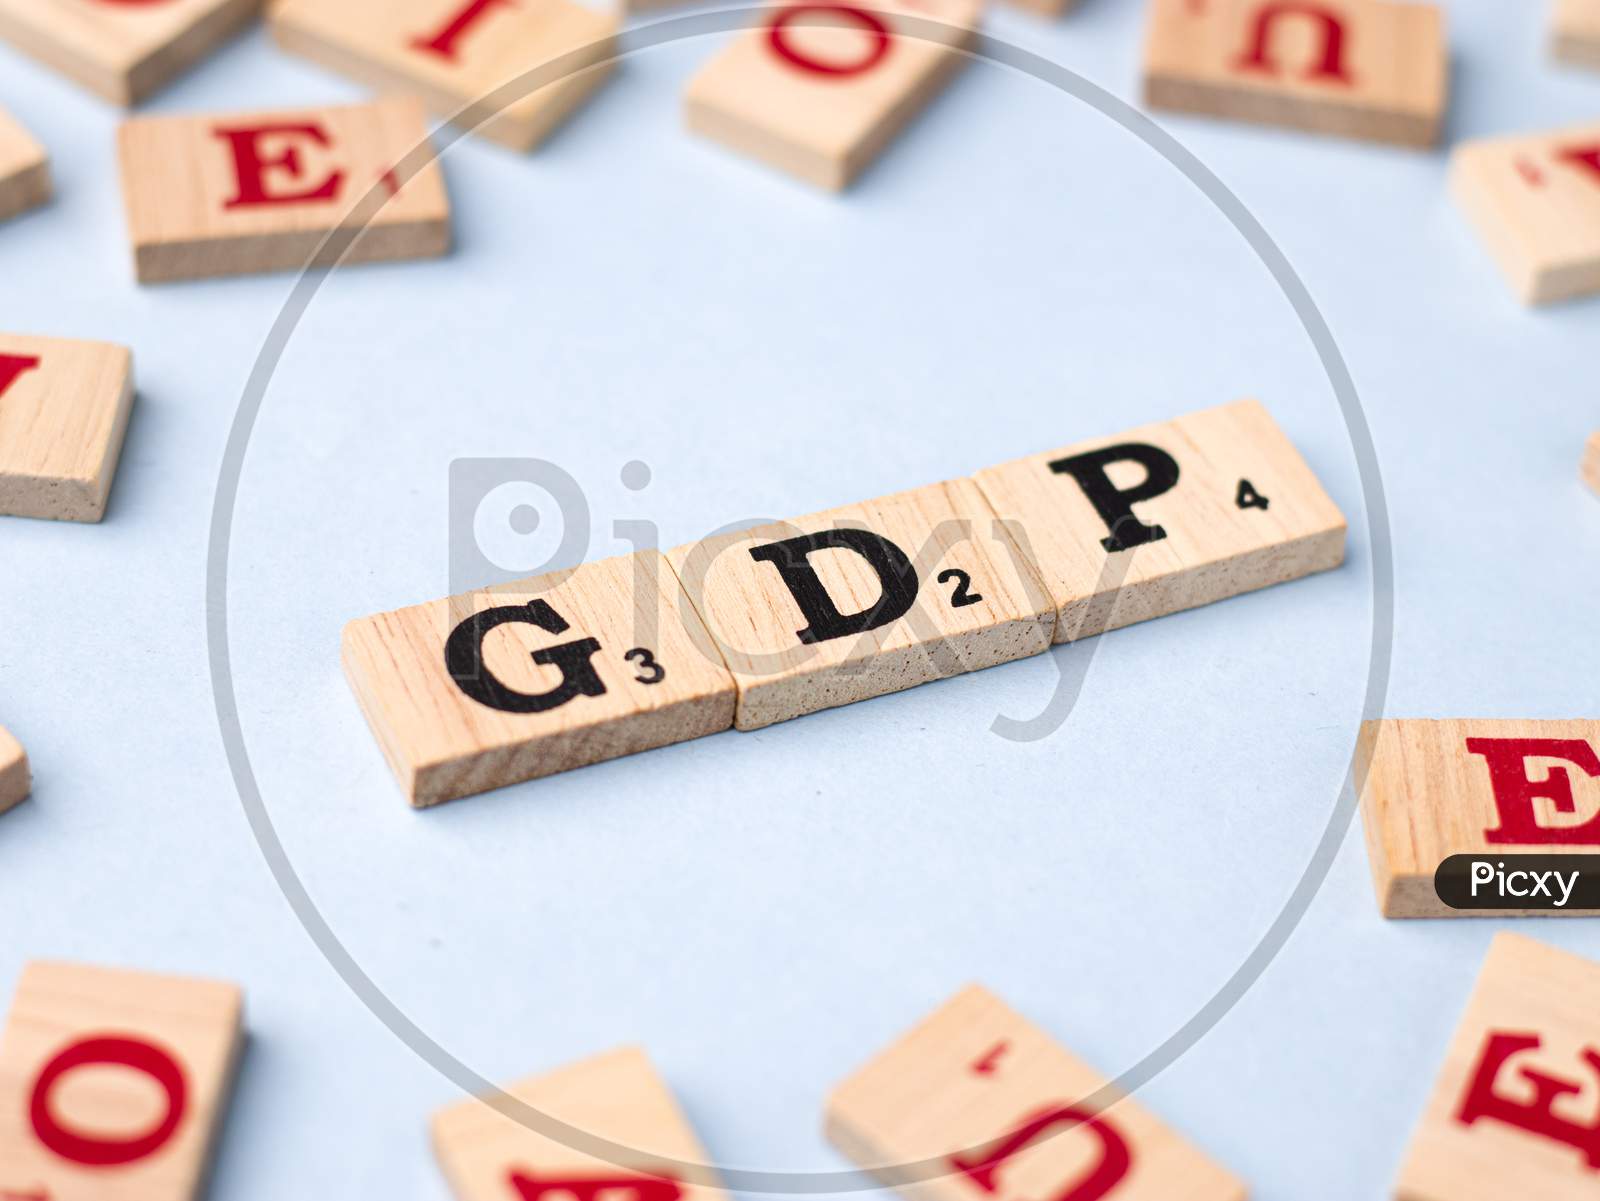 Assam, india - March 30, 2021 : Word GDP written on wooden cubes stock image.